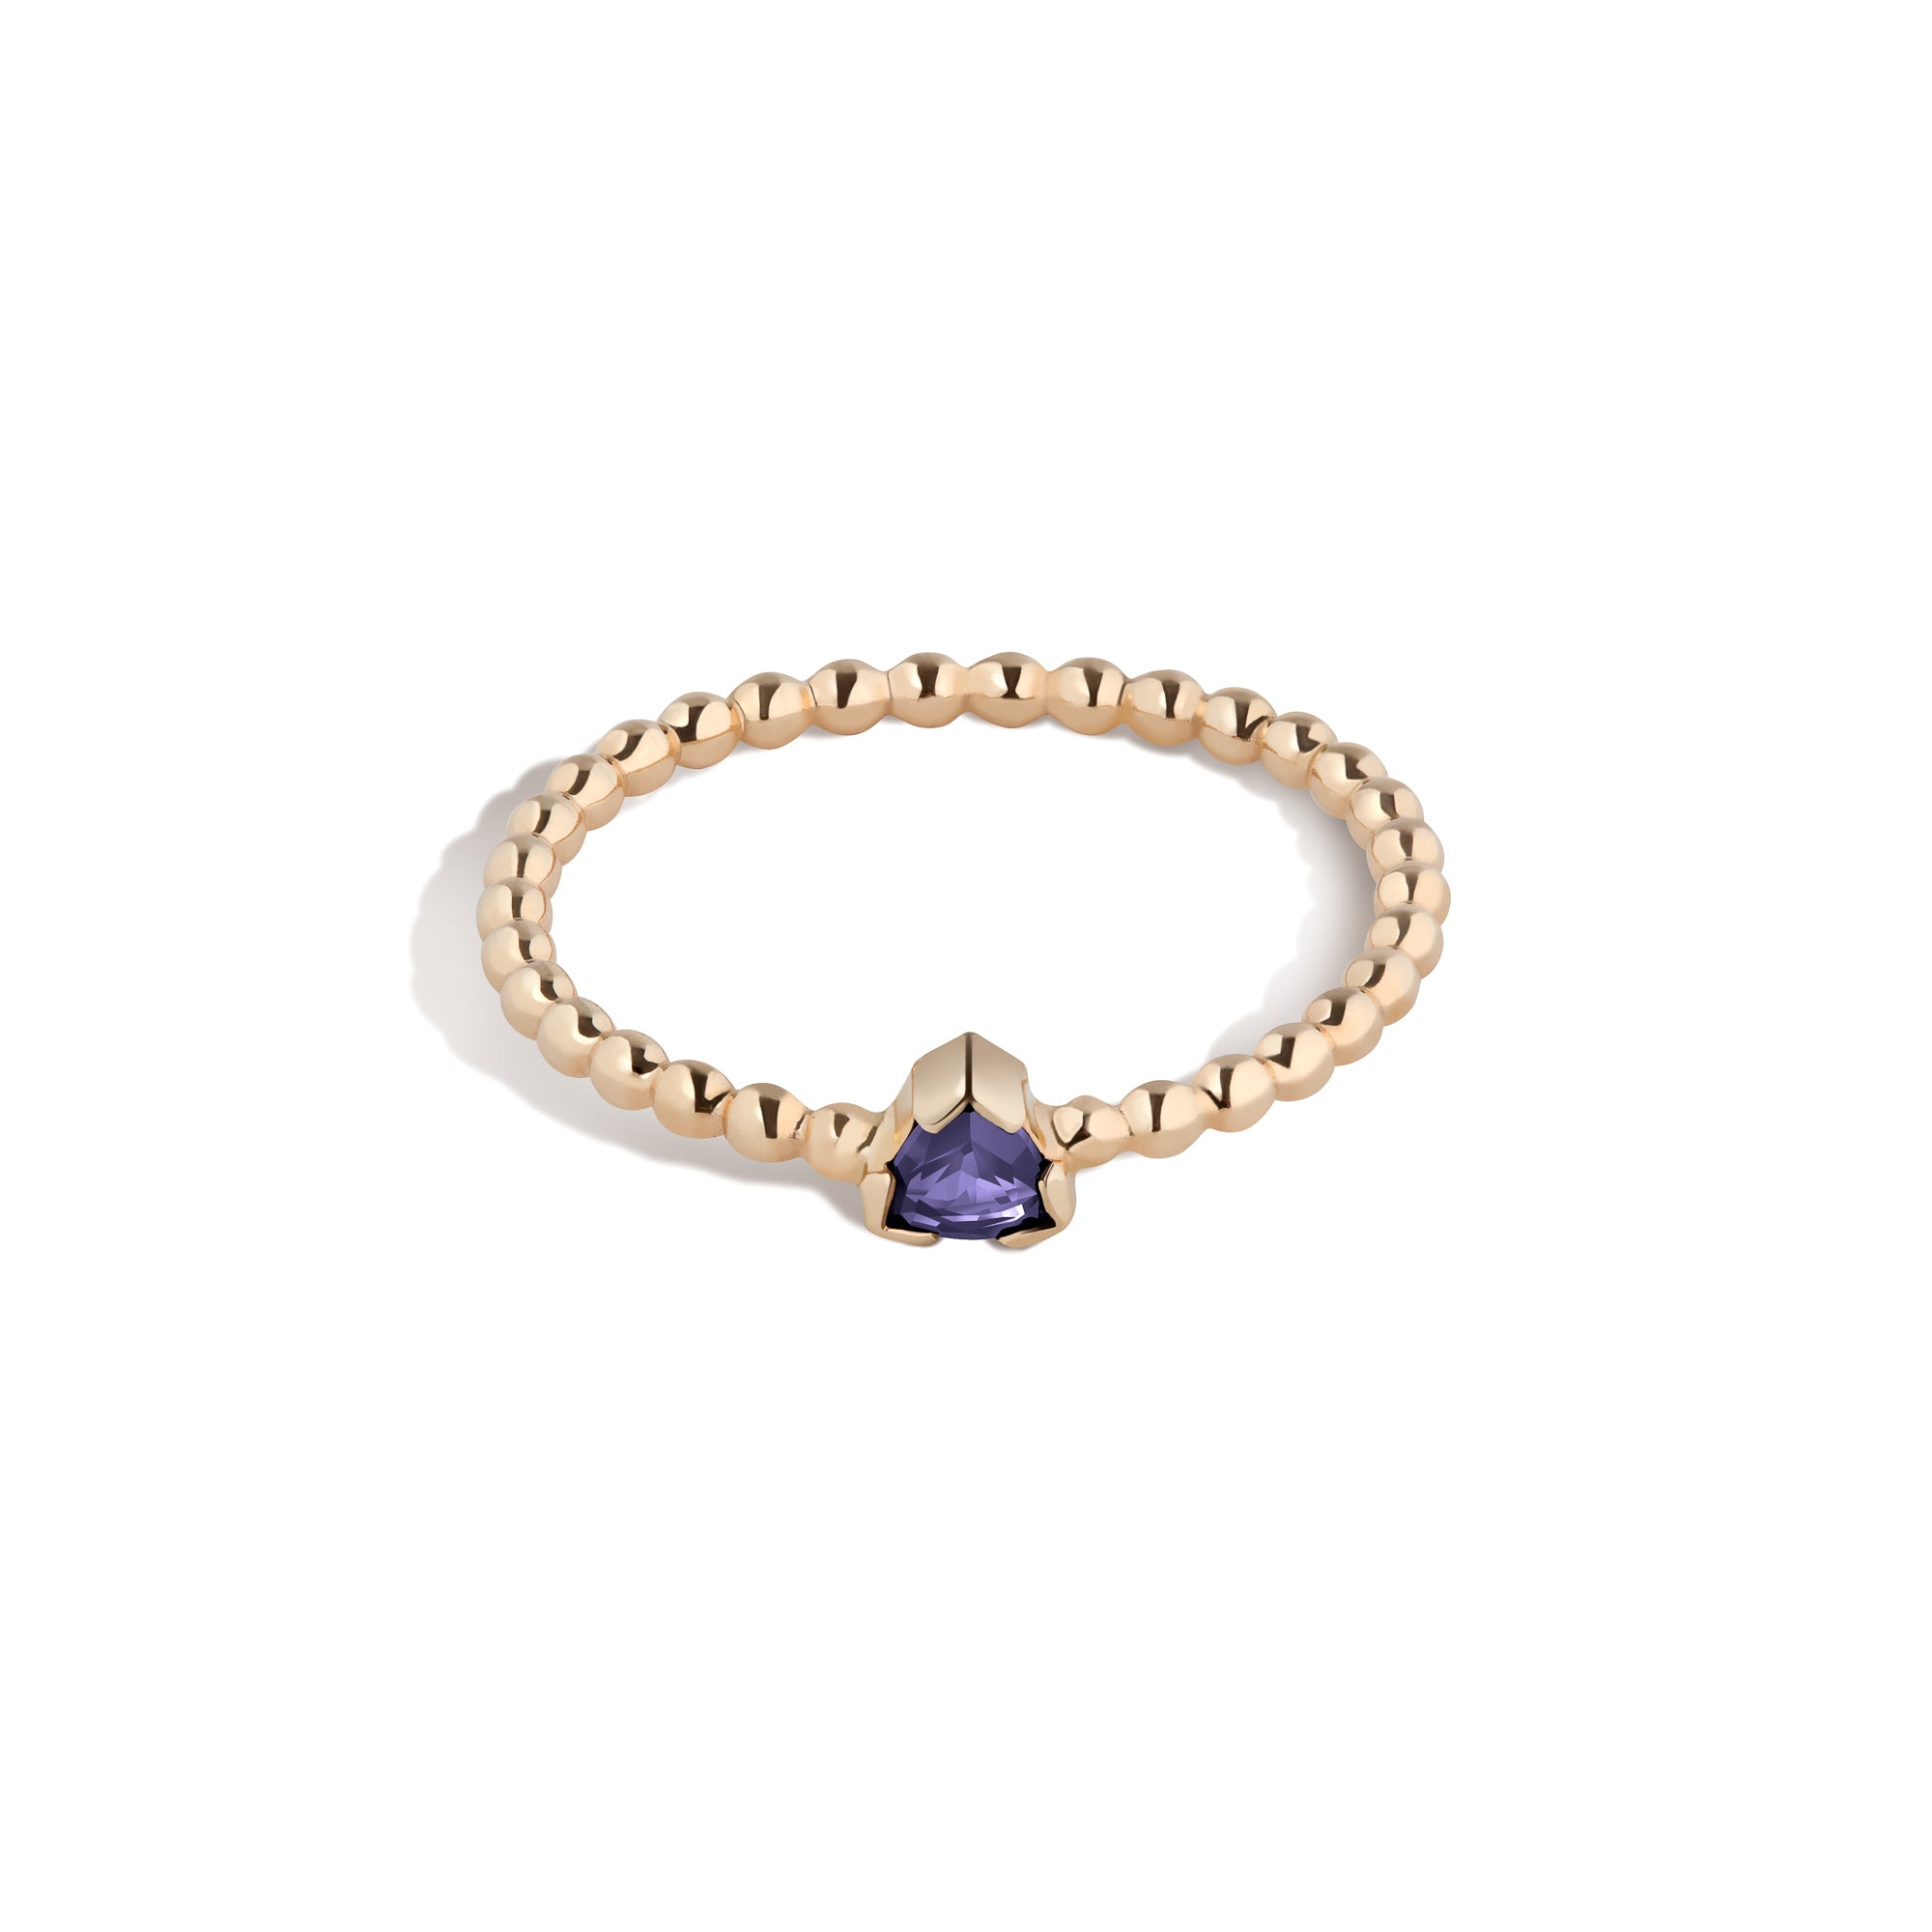 Shop Real Tanzanite Ring in 14k Solid Yellow Gold | December Birthstone